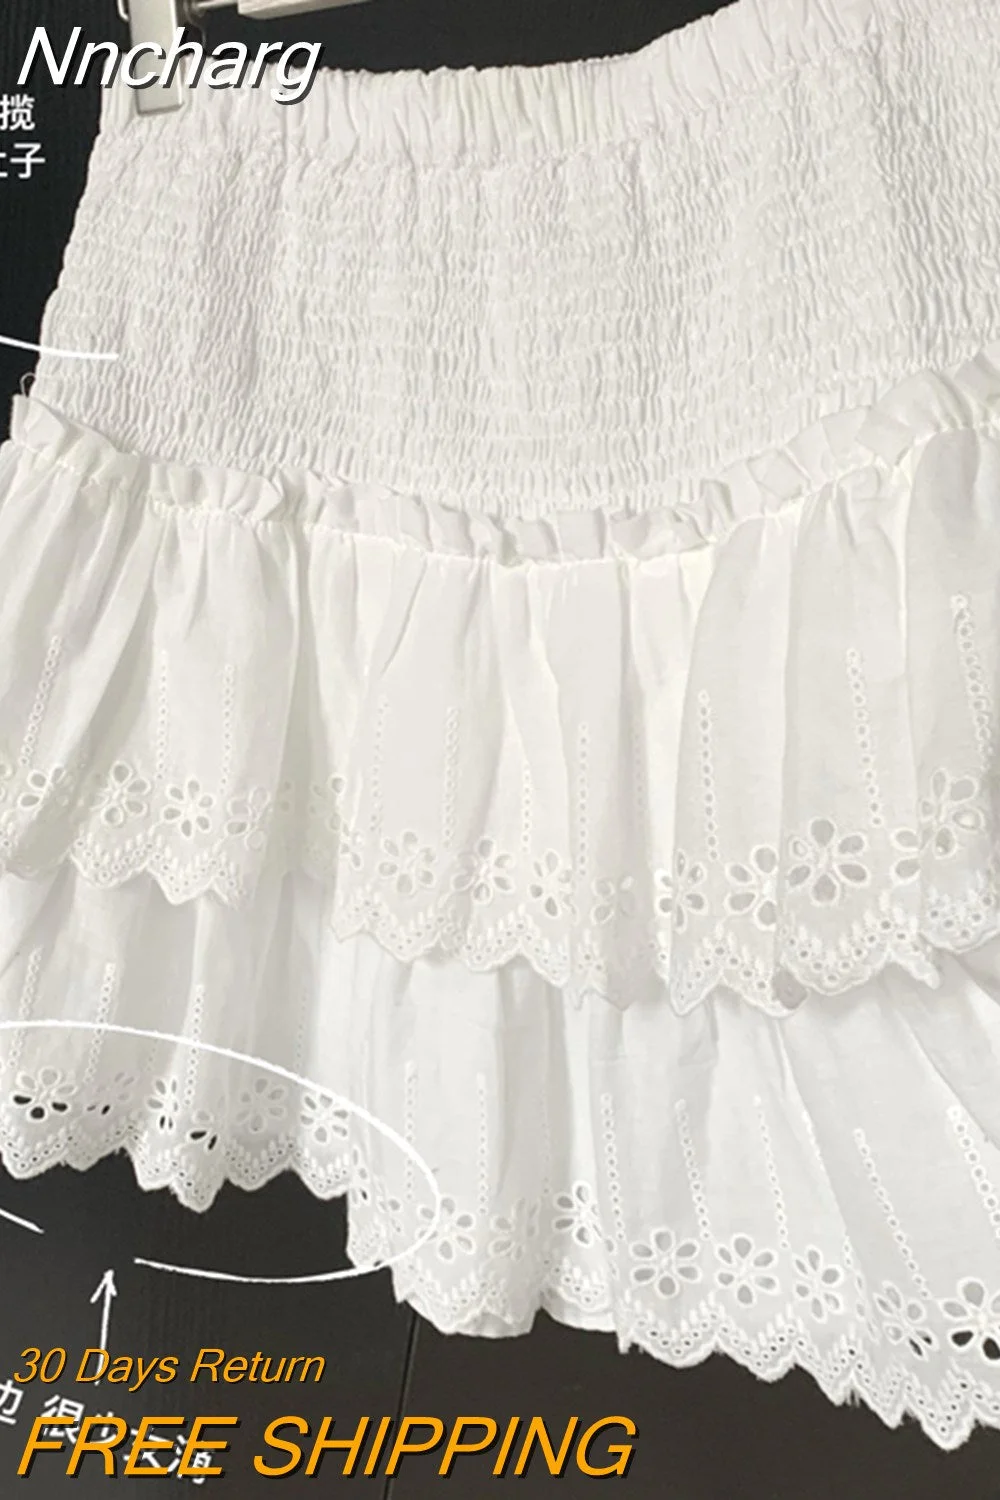 Nncharge Embroidery Folds Sweet Skirt Elastic Waist Ball Gown A-Line Cake Mini Y2k Ballet White Skirts Women Hotsweet High Street